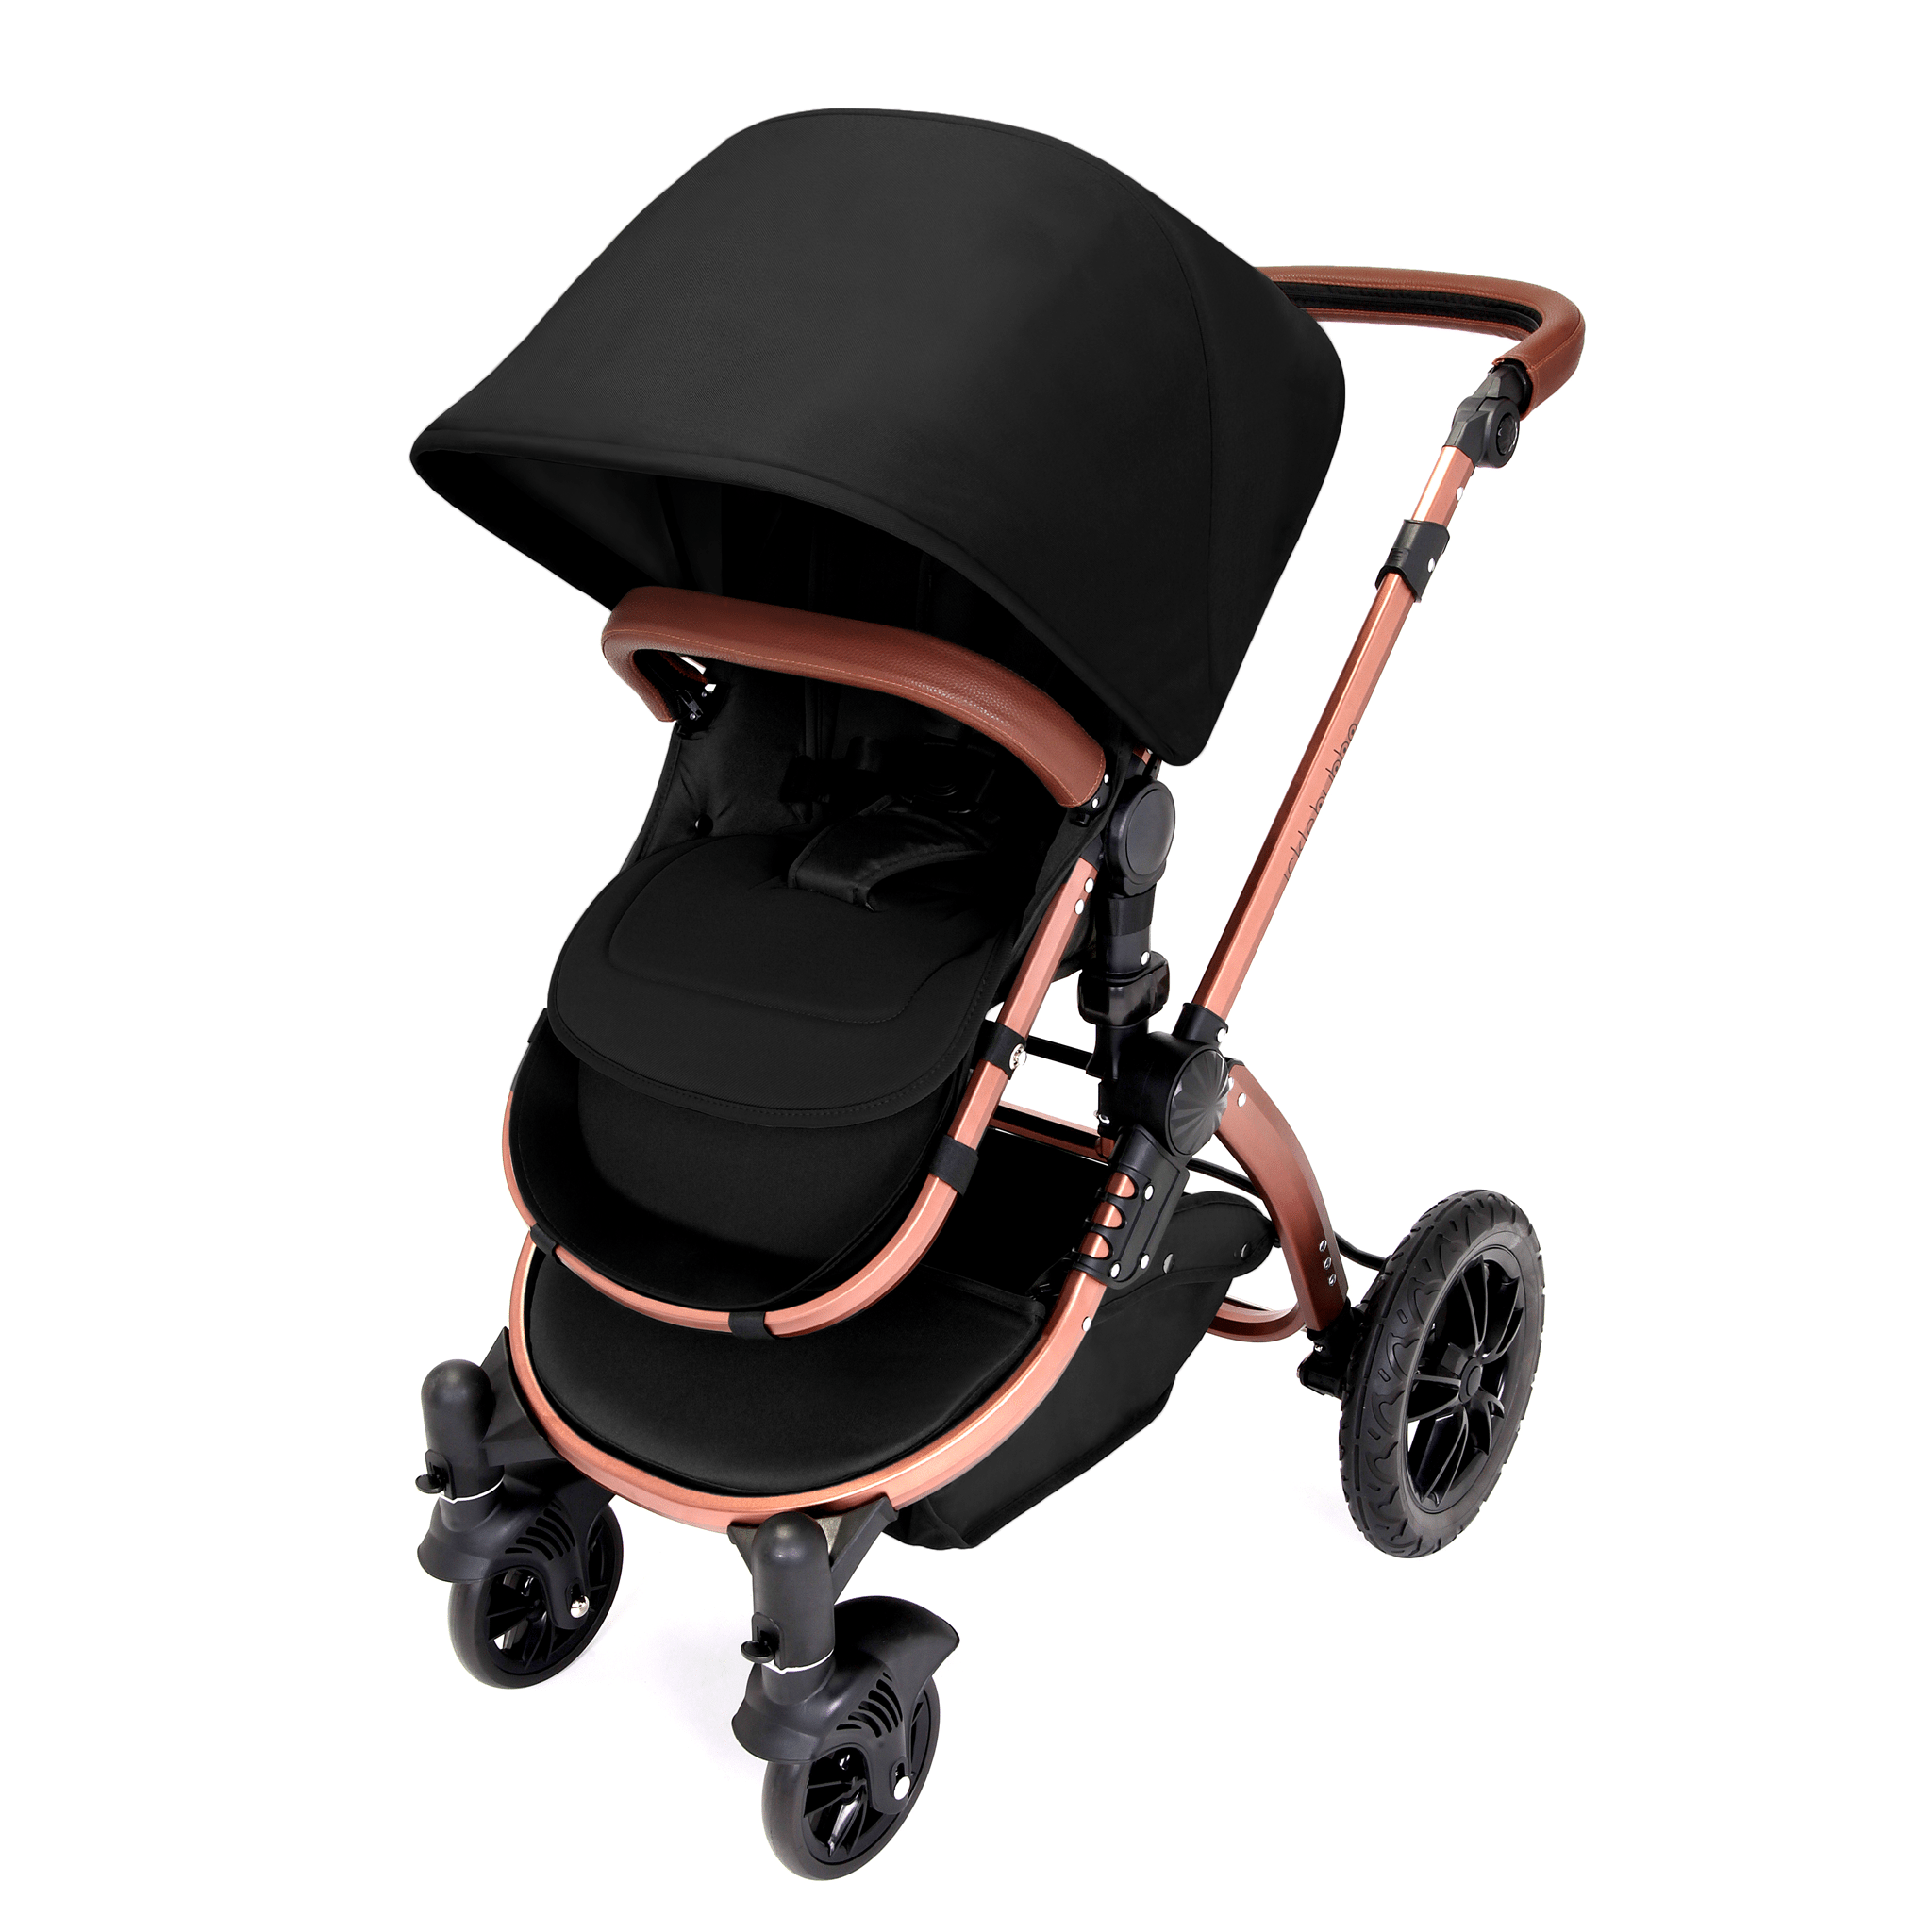 Ickle Bubba baby pushchairs Ickle Bubba Stomp V4 2-in-1 Pushchair Bronze/Midnight 10-004-000-021